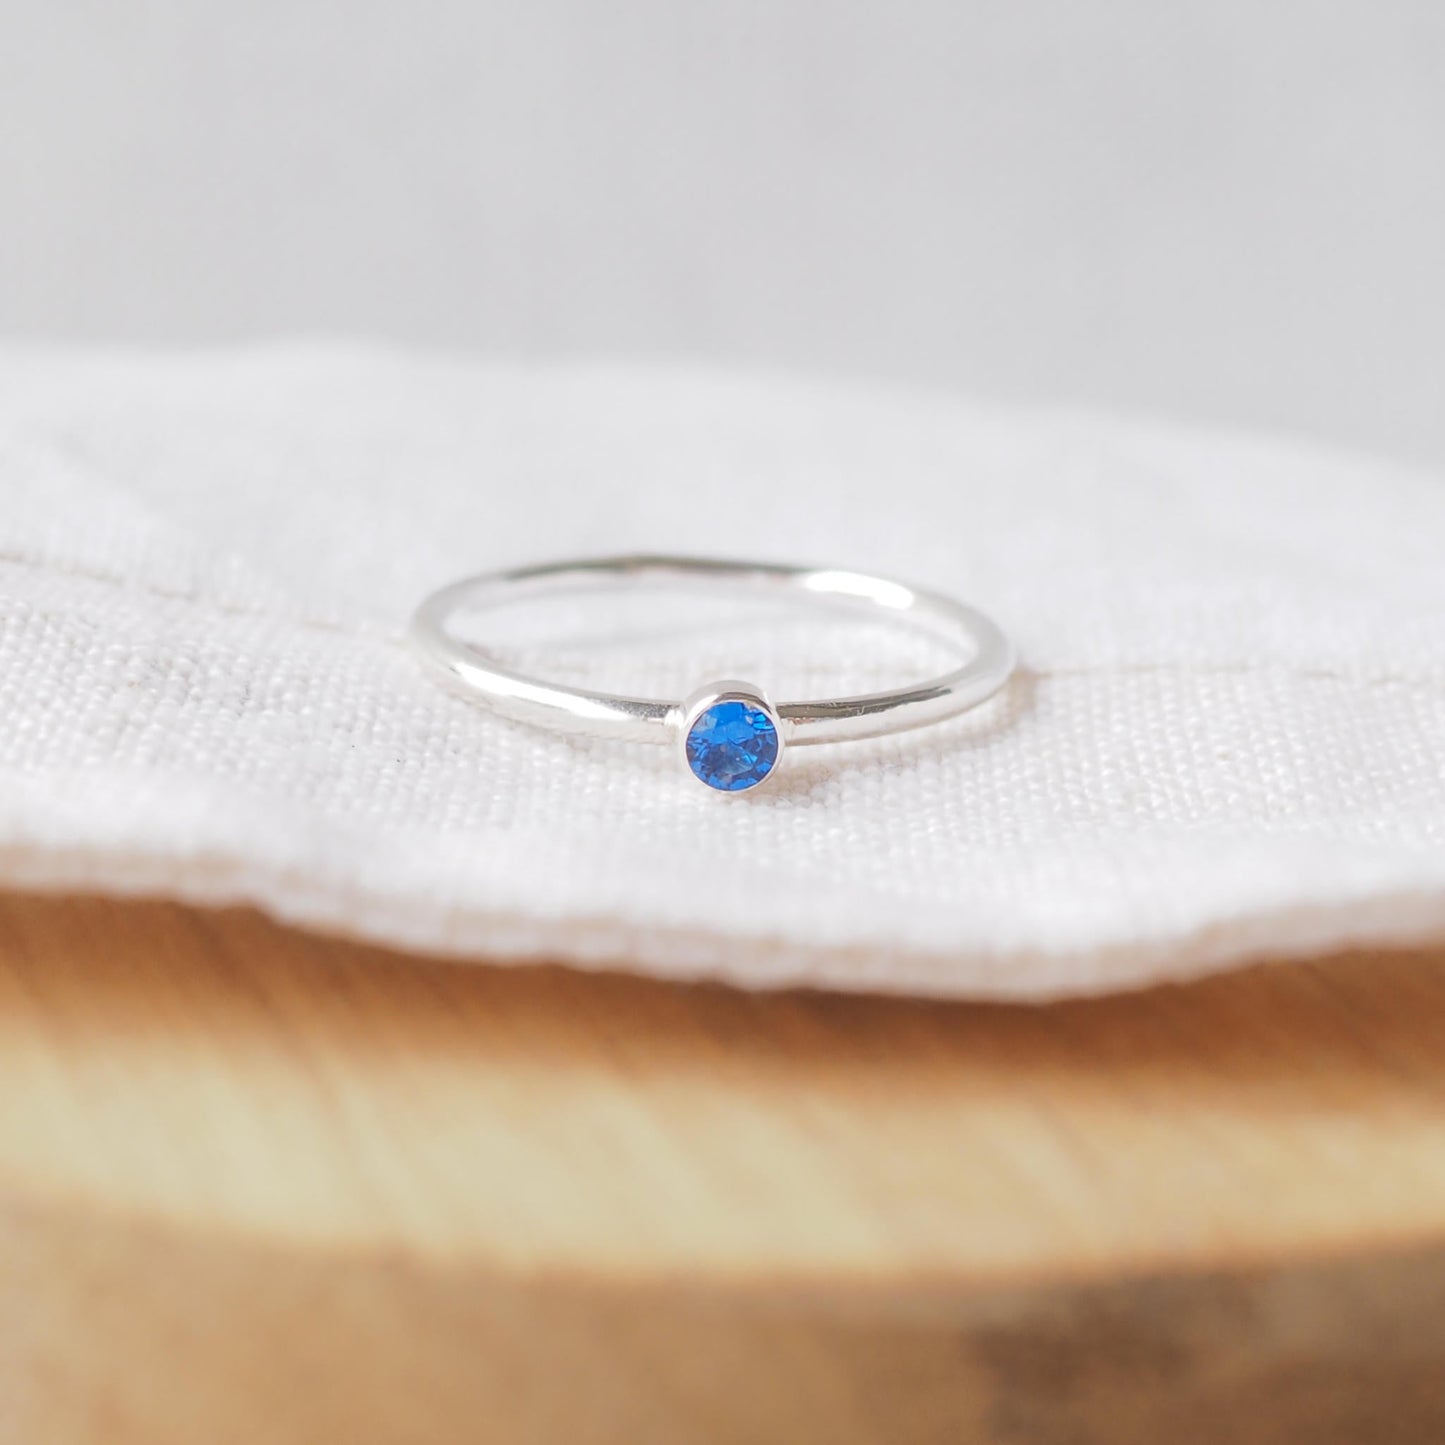 Silver ring with a bright blue gemstone. The ring is simple in style with no embellishment , with a round wire band 1.5mm thick with a simple blue sapphire 3mm round cubic zirconia stone set in an enclosed silver setting. Sapphire is birthstone for September. The ring is Sterling Silver and made to your ring size. Handmade in Scotland by Maram Jewellery